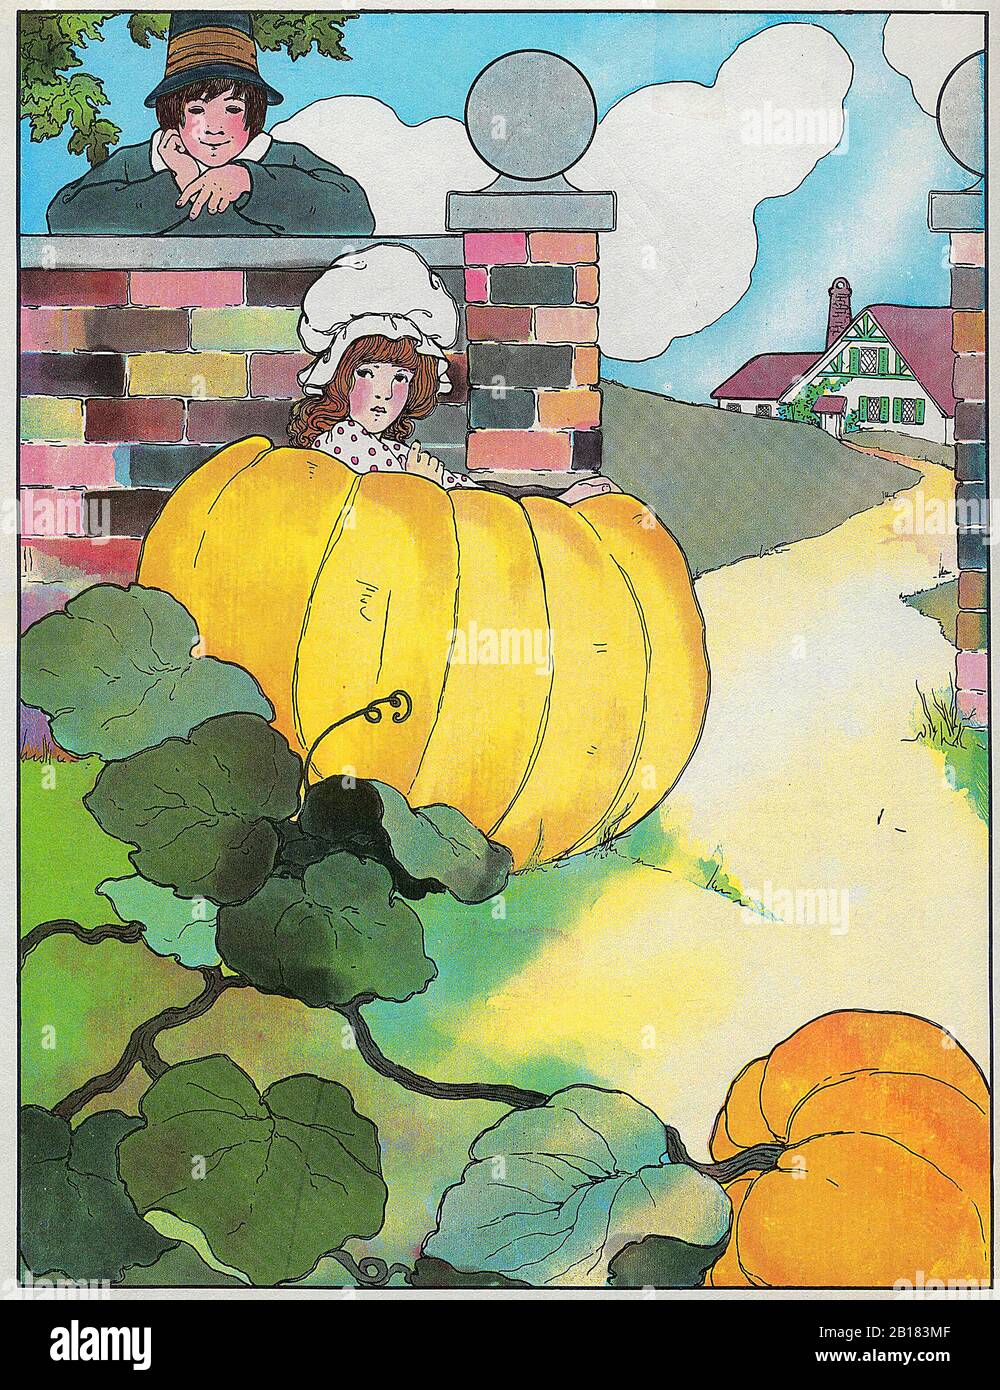 Peter, Peter, pumpkin-eater, Had a wife and couldn't keep her - The Real Mother Goose Nursery Rhyme Illustration by Blanche Fisher Wright circa 1915 Stock Photo